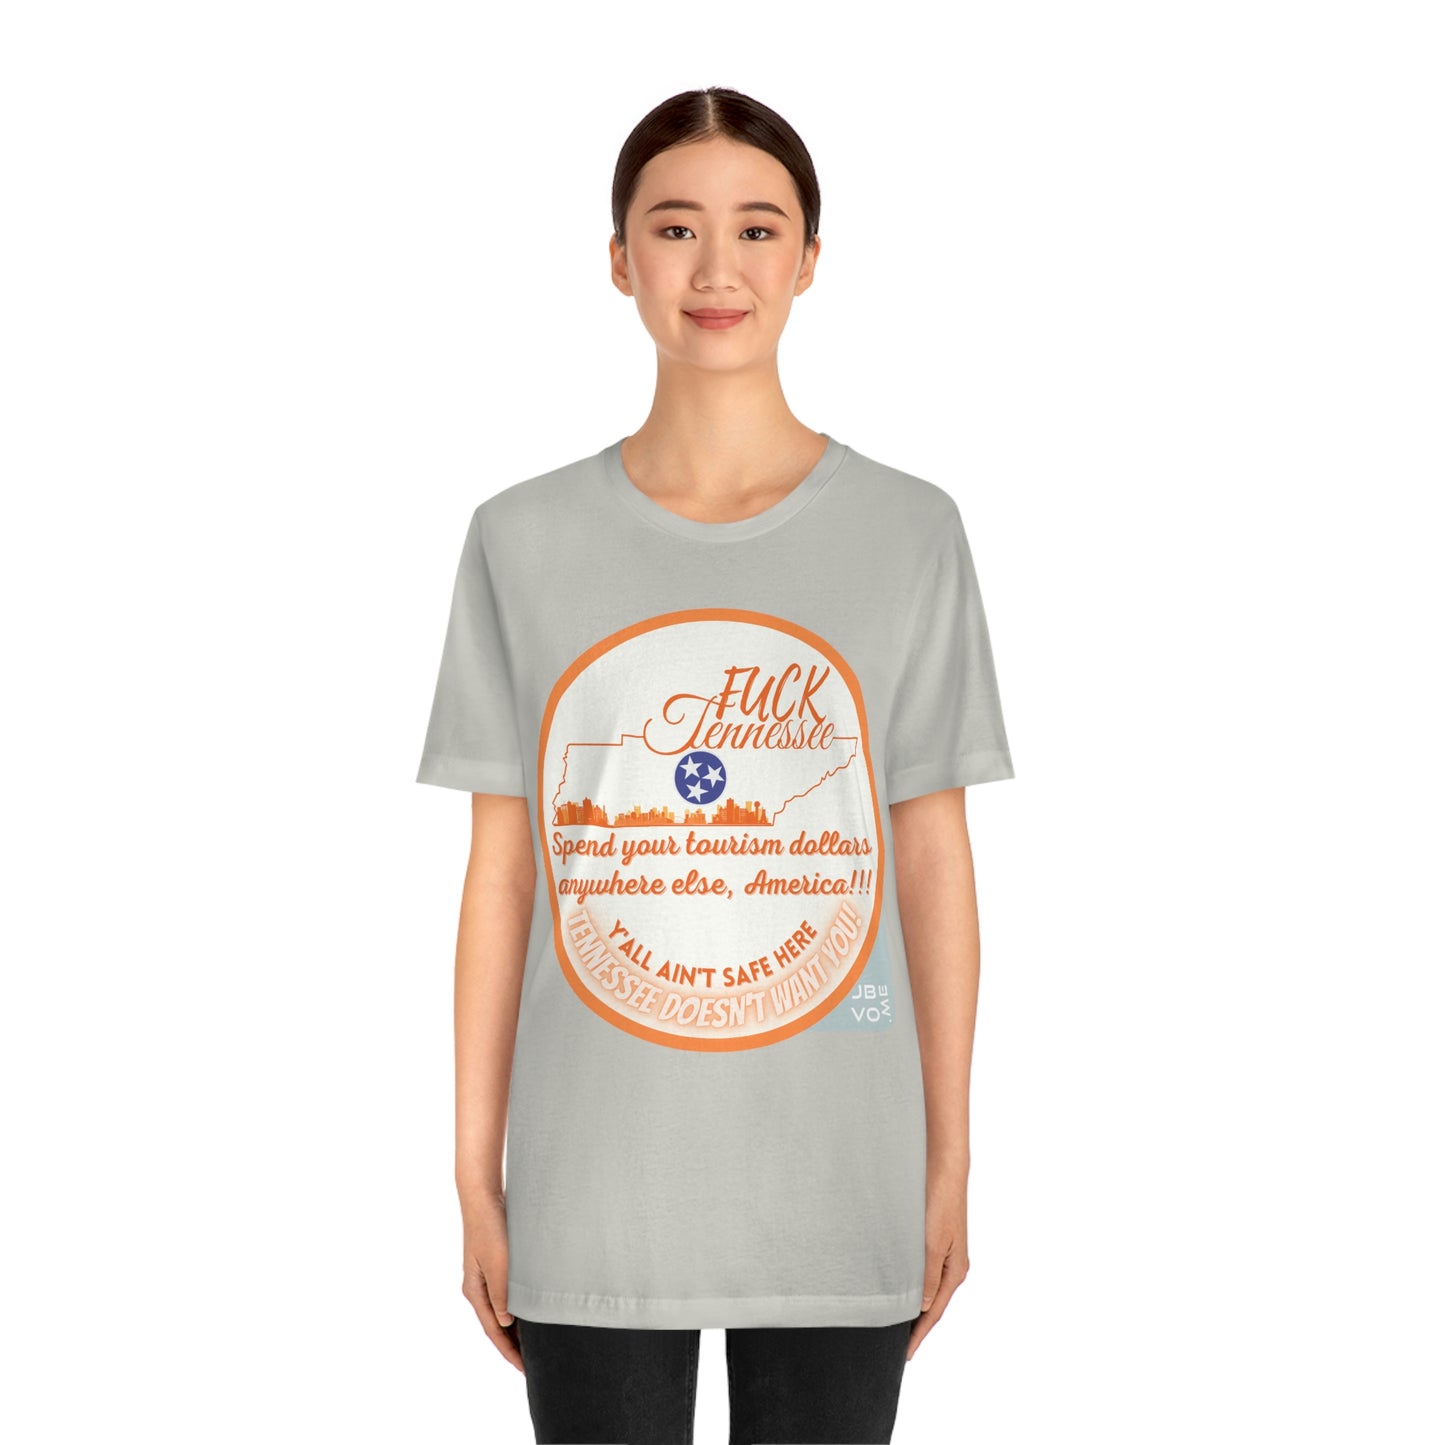 F*** Tennessee Drag-Ban Protest Shirt Unisex Jersey Short Sleeve Tee (SirTalksALot Exclusive)